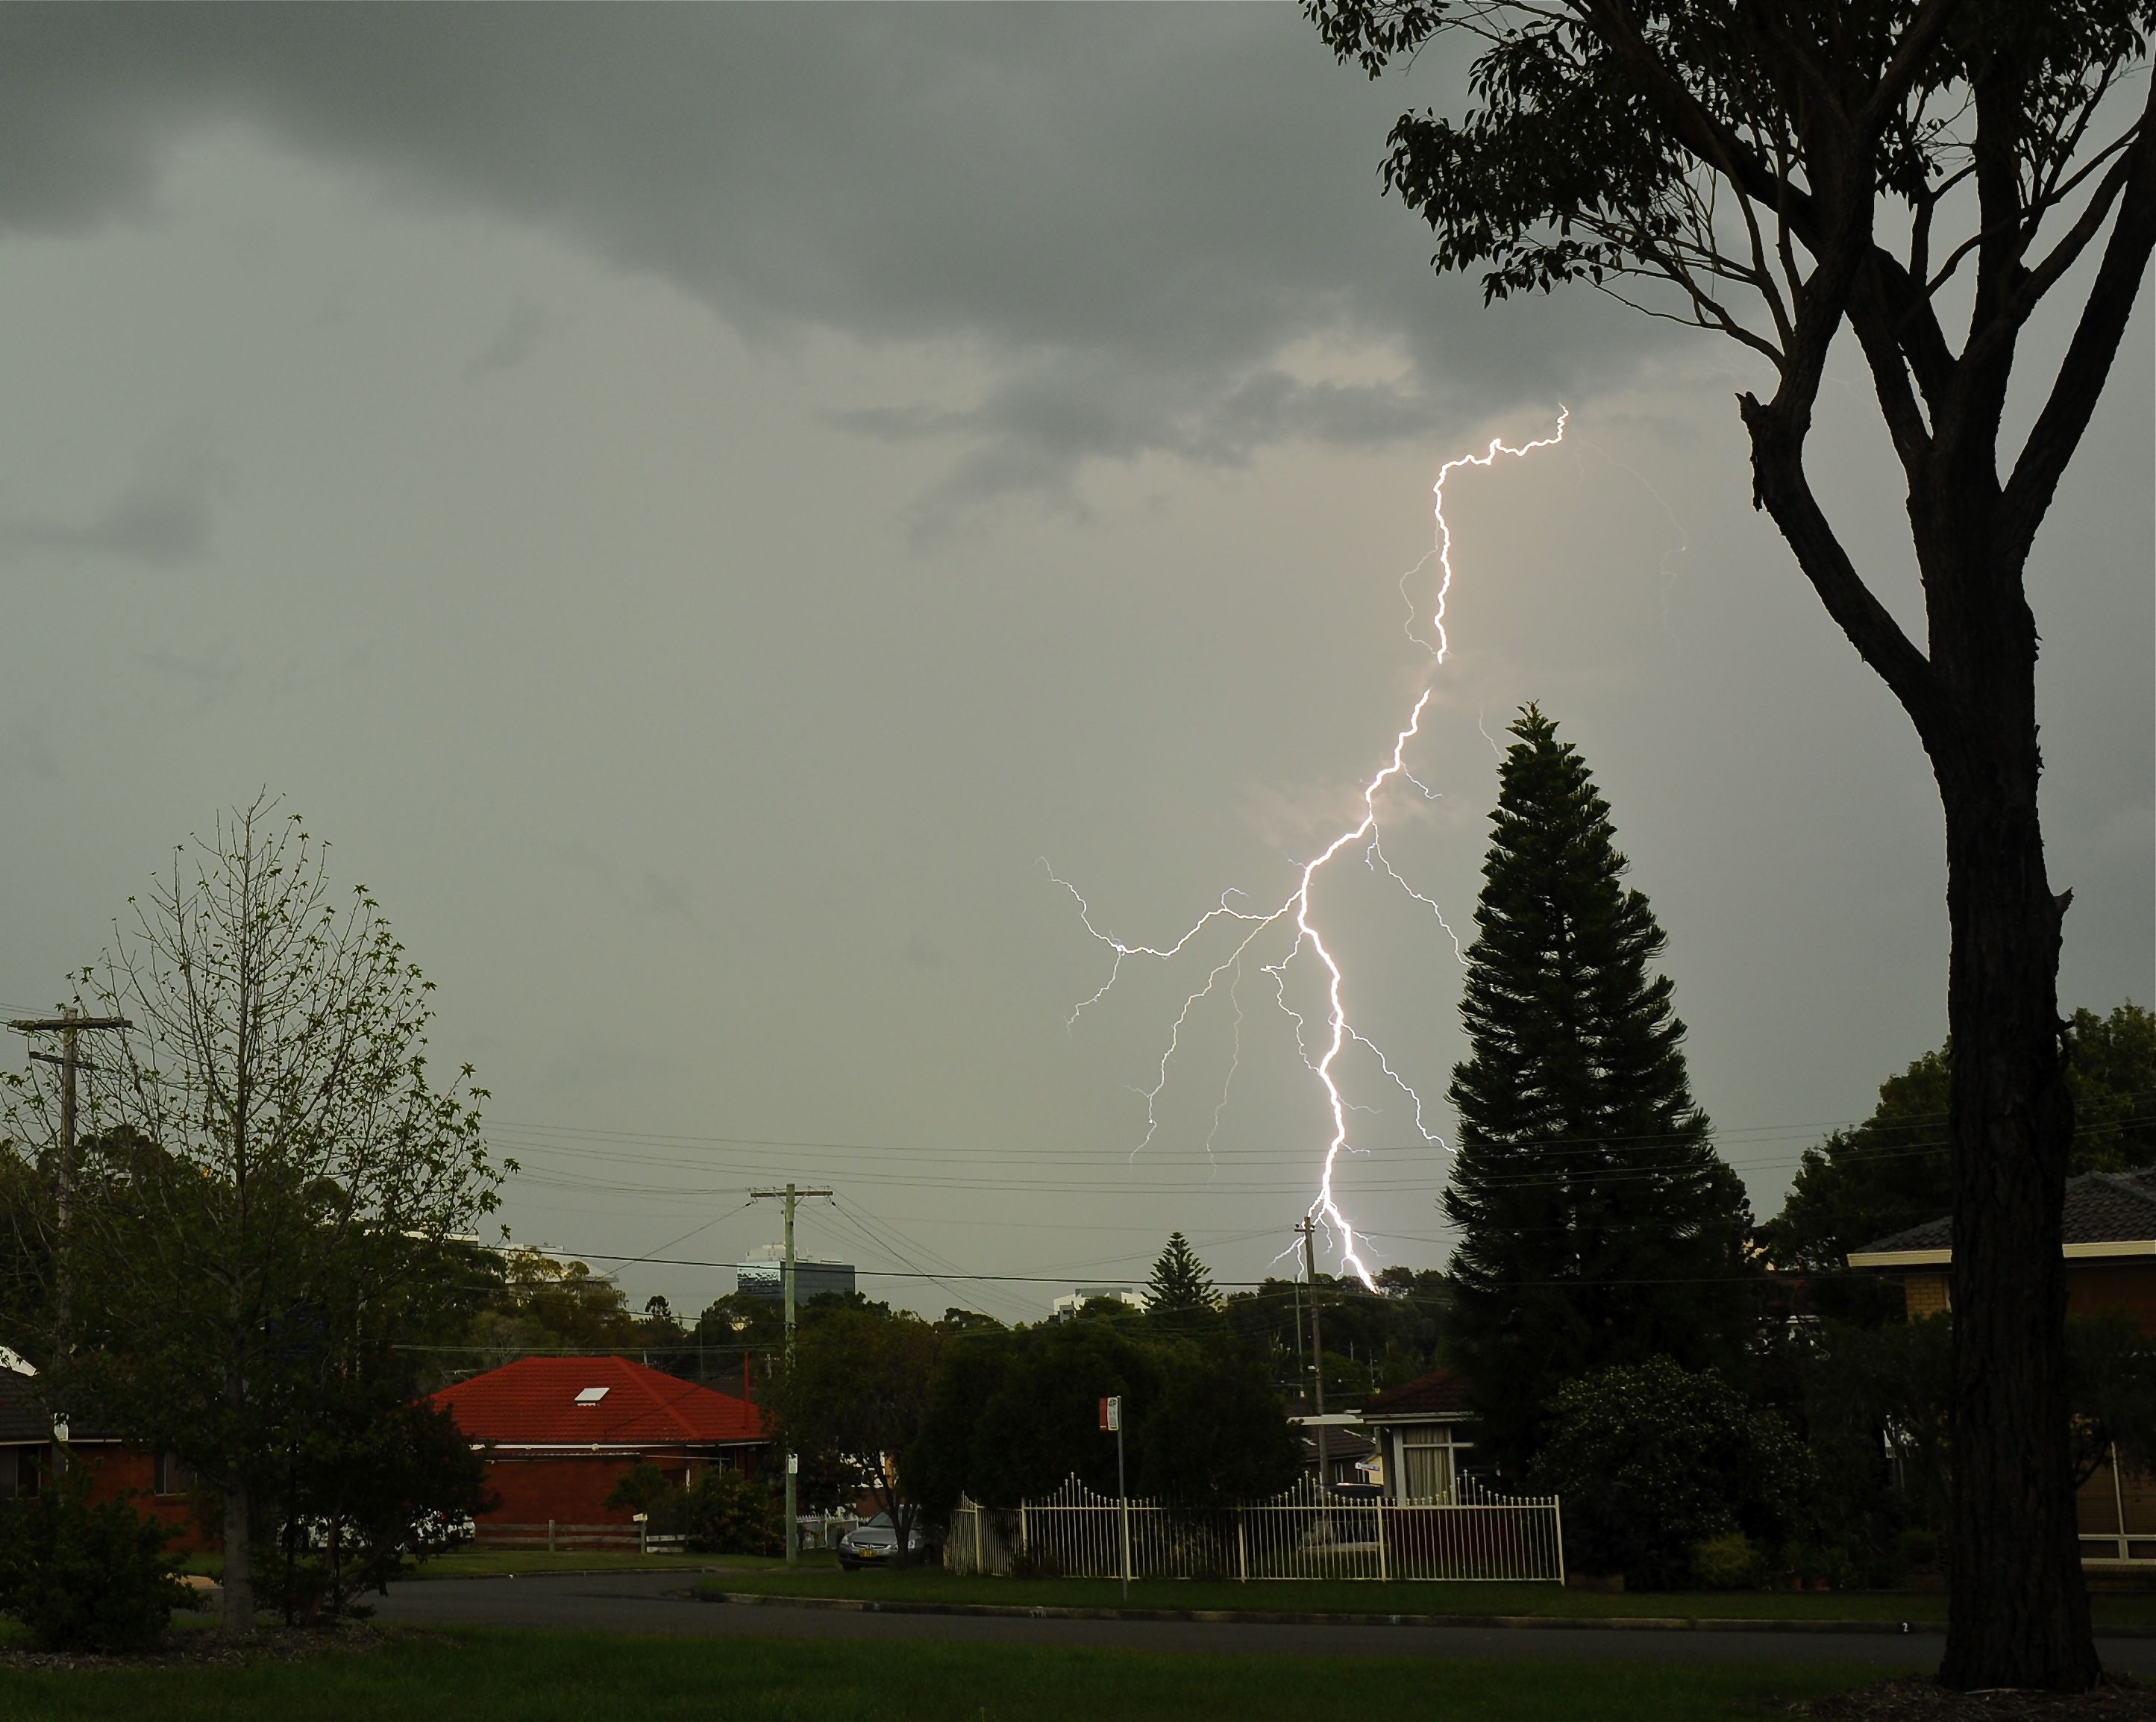 Saturday 15 March 2014 storms and strong lightning strikes 9